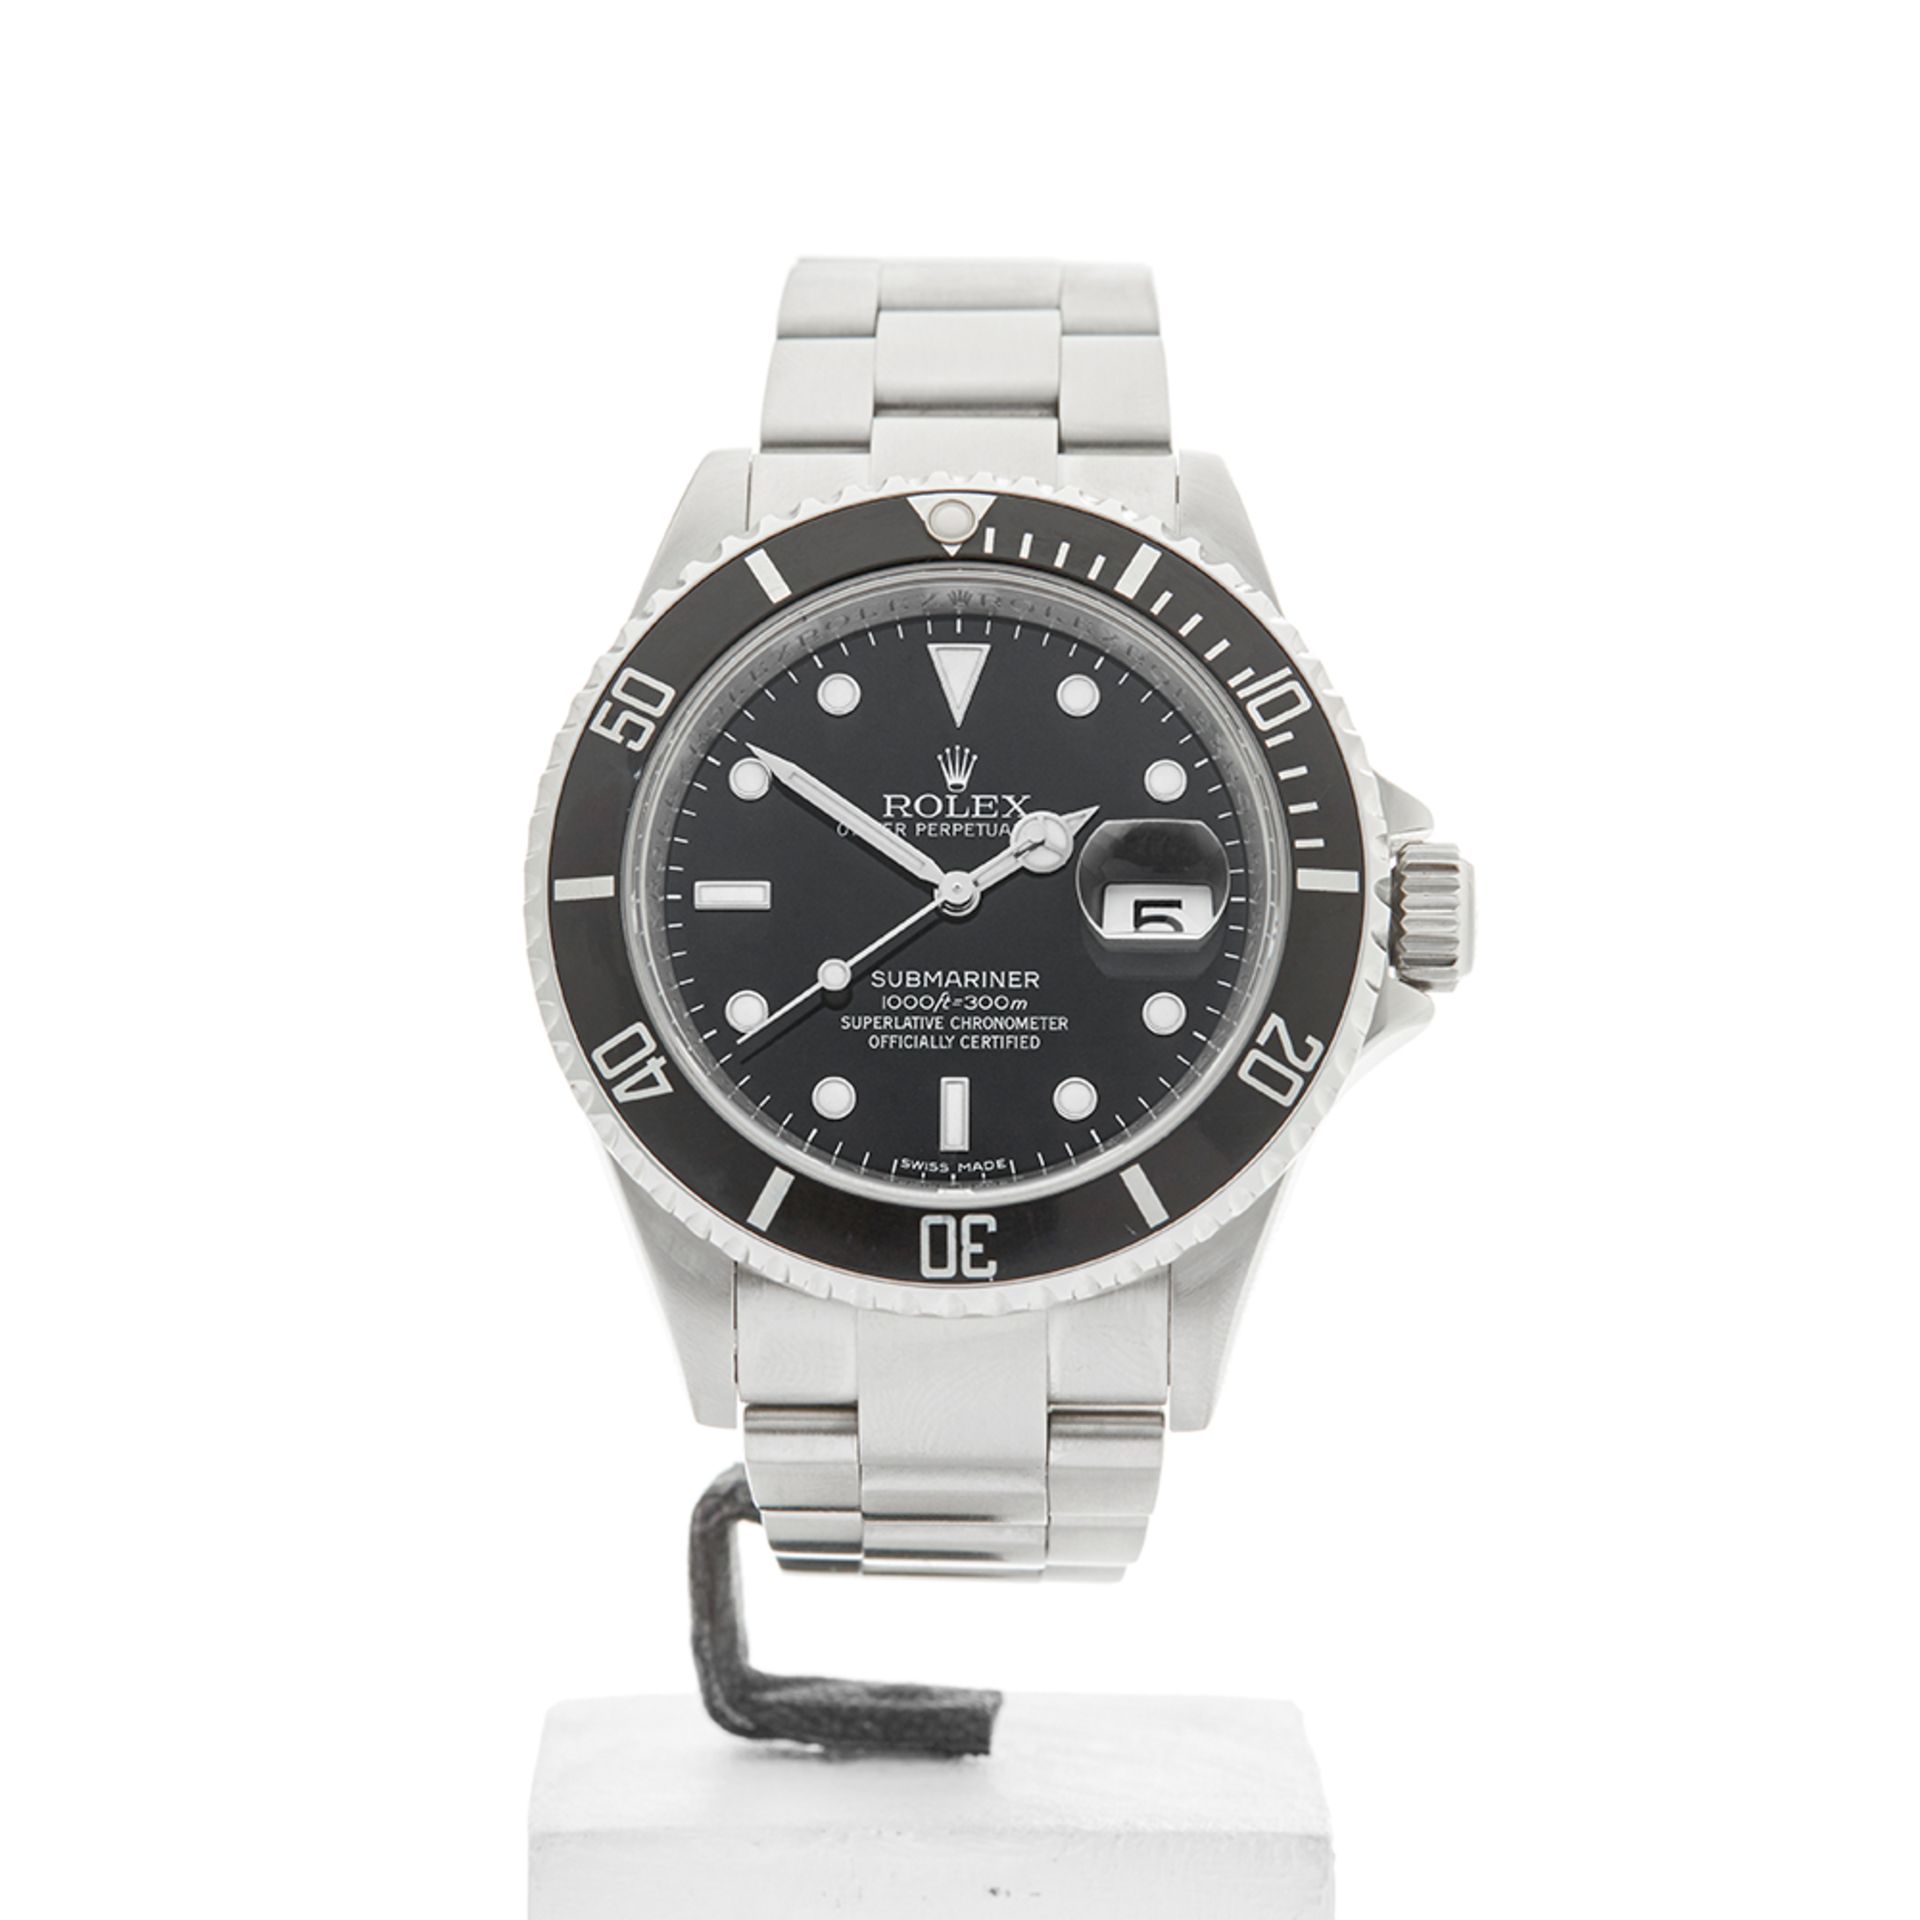 W3946 Submariner 40mm Stainless Steel - 16610 - Image 2 of 9